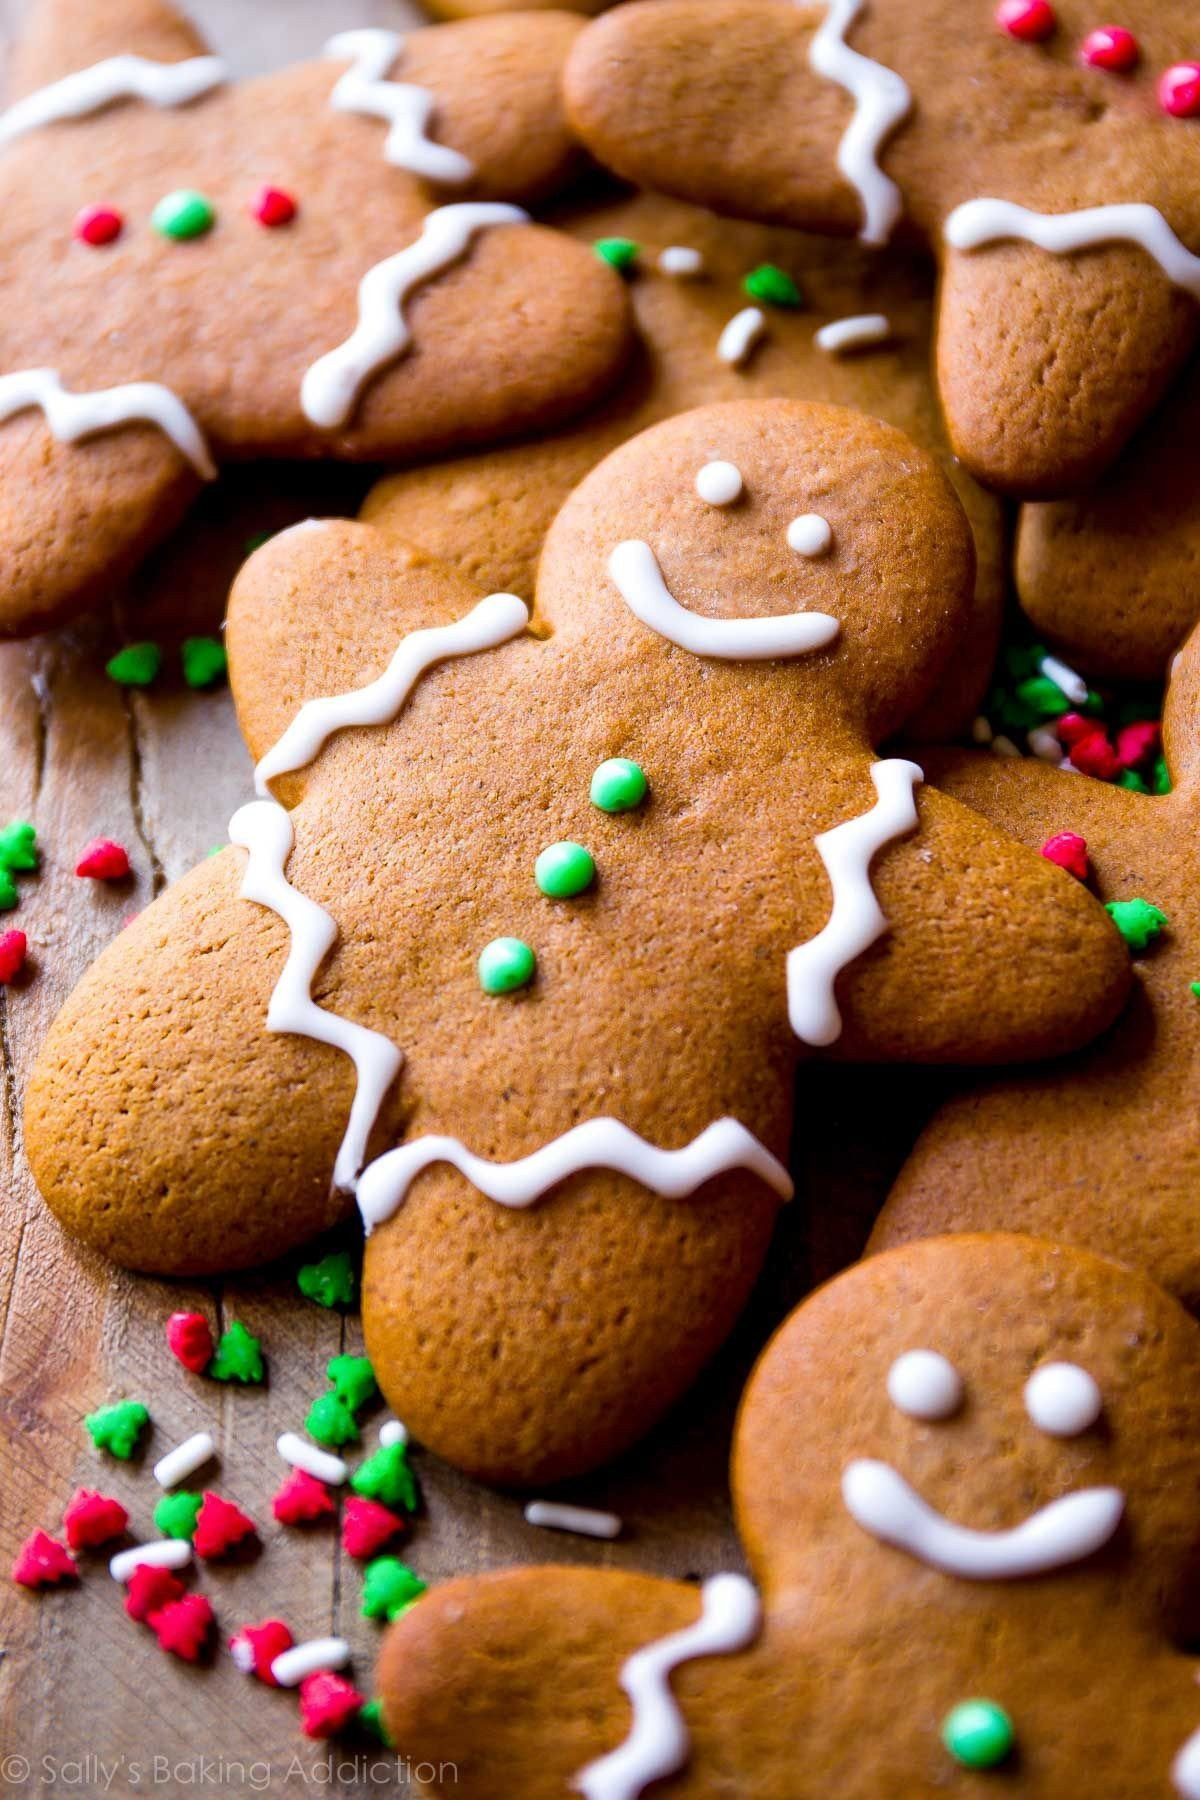 Baking Christmas Cookies Lovely 30 Christmas Cookie Recipes Quick and Easy